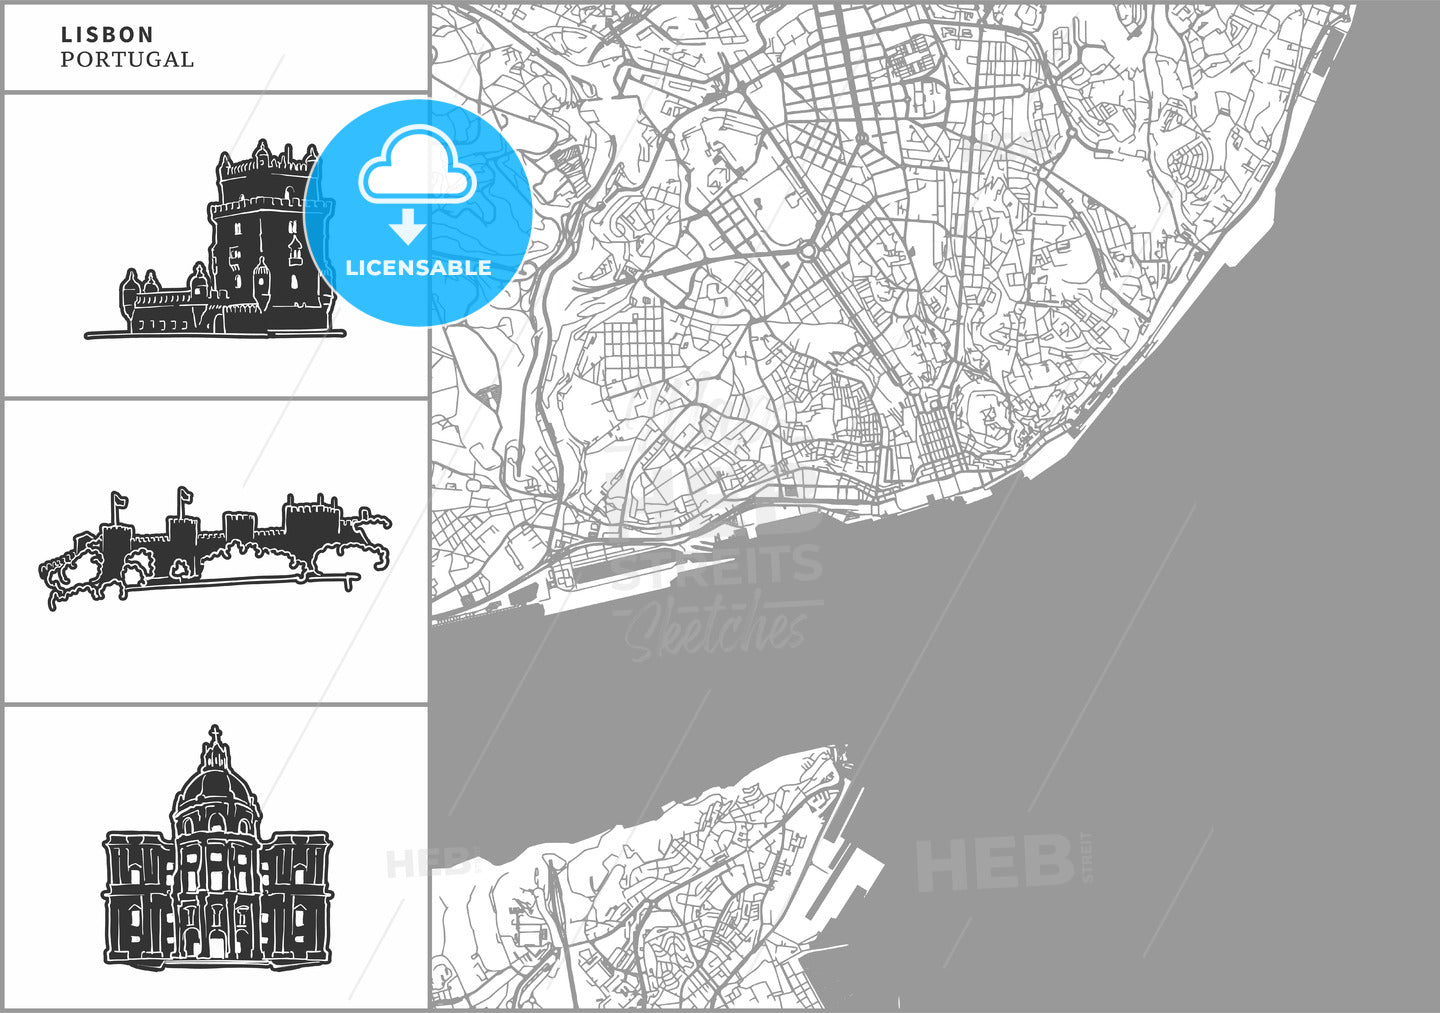 Lisbon city map with hand-drawn architecture icons